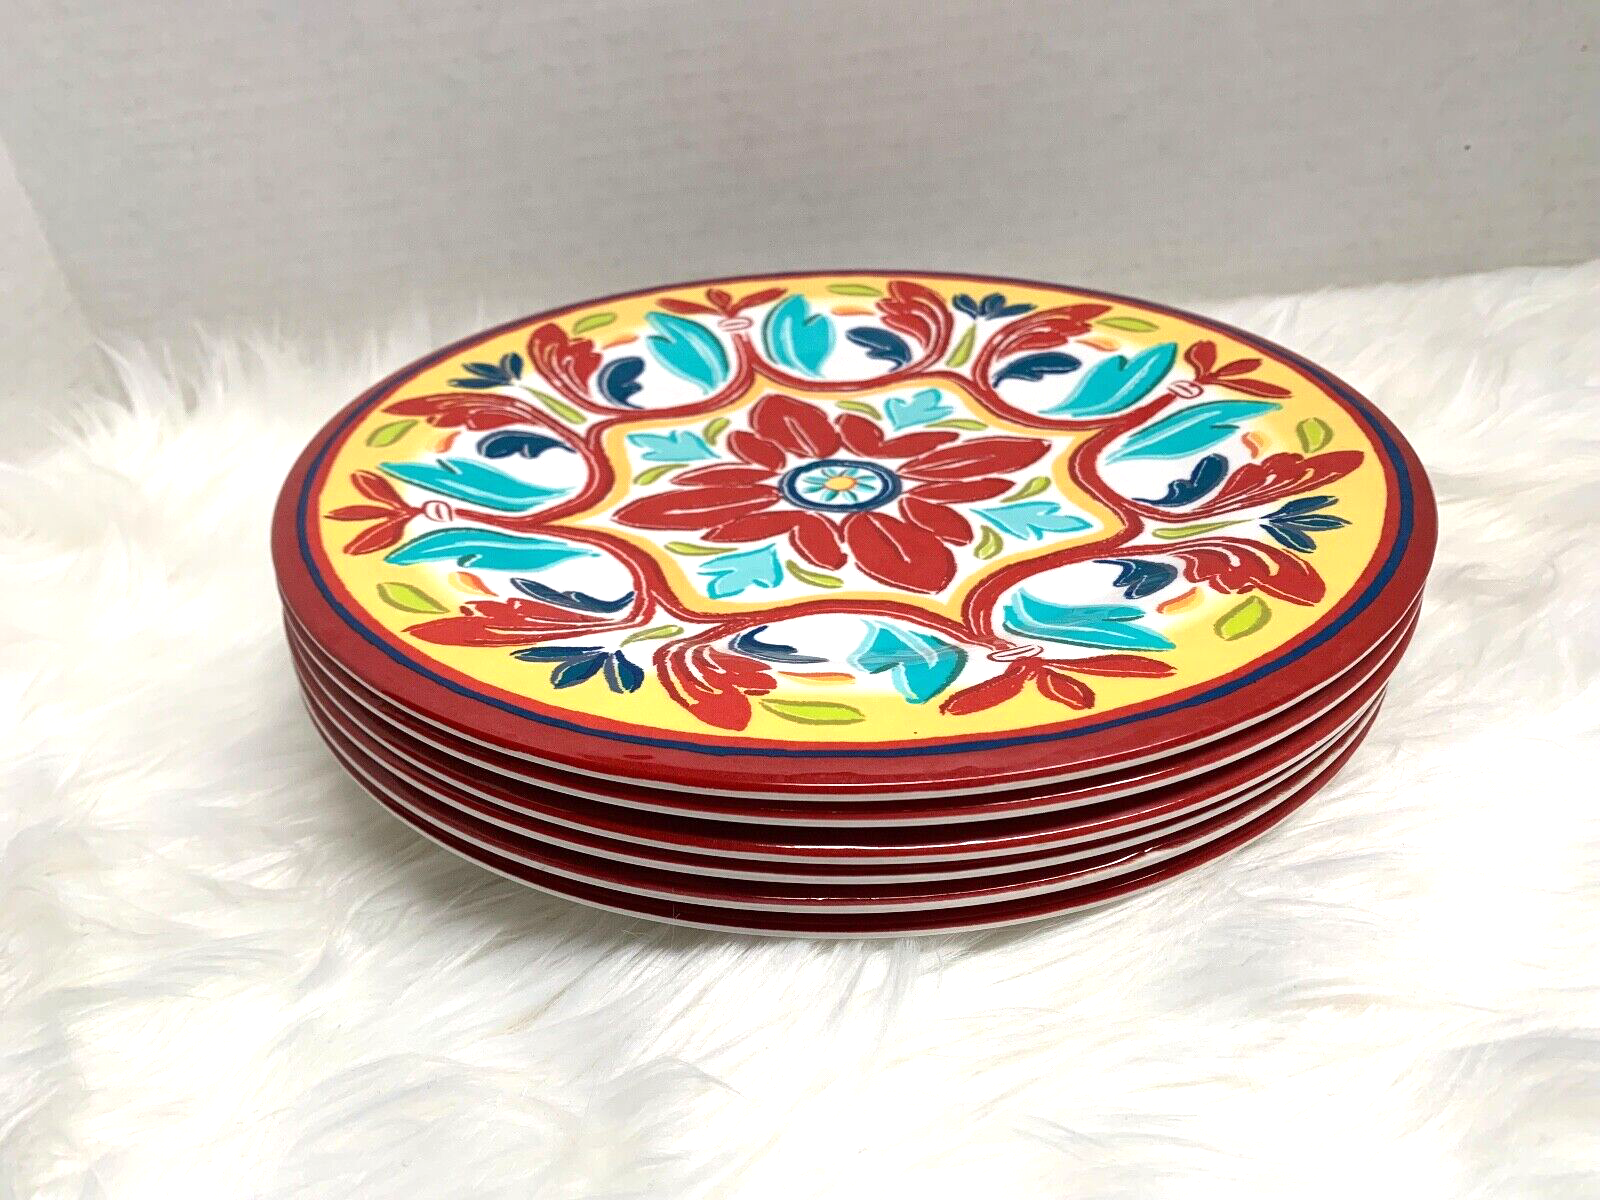 Primary image for Bobby Flay Lot of 6 Hard Plastic Melamine Dinner Plates Floral Red Turquoise